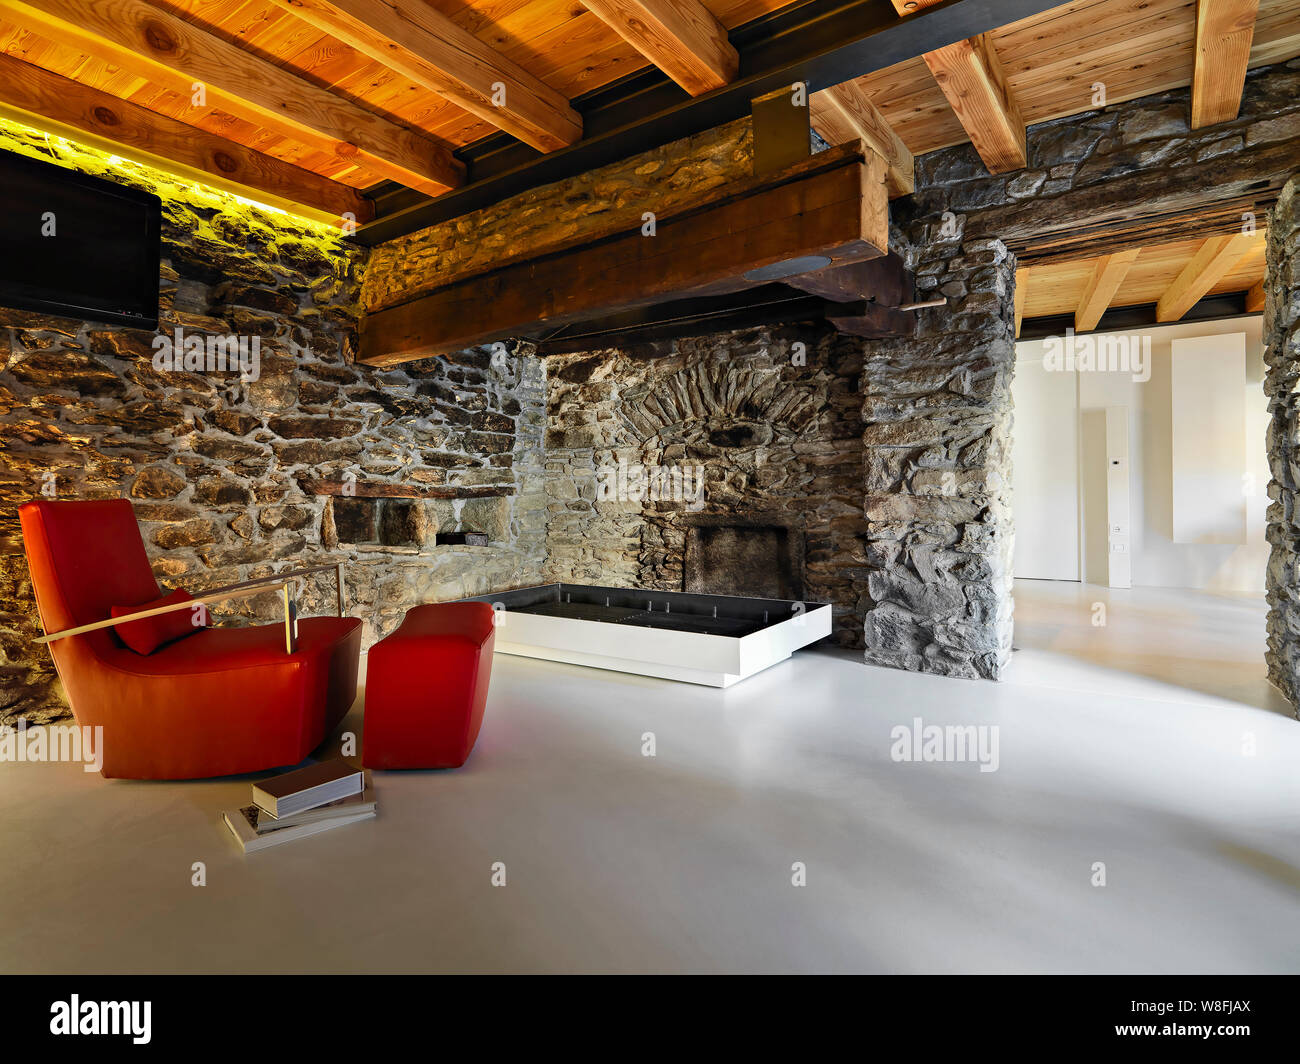 Interior Shots Of A Rustic Living Room With Resin Floor In